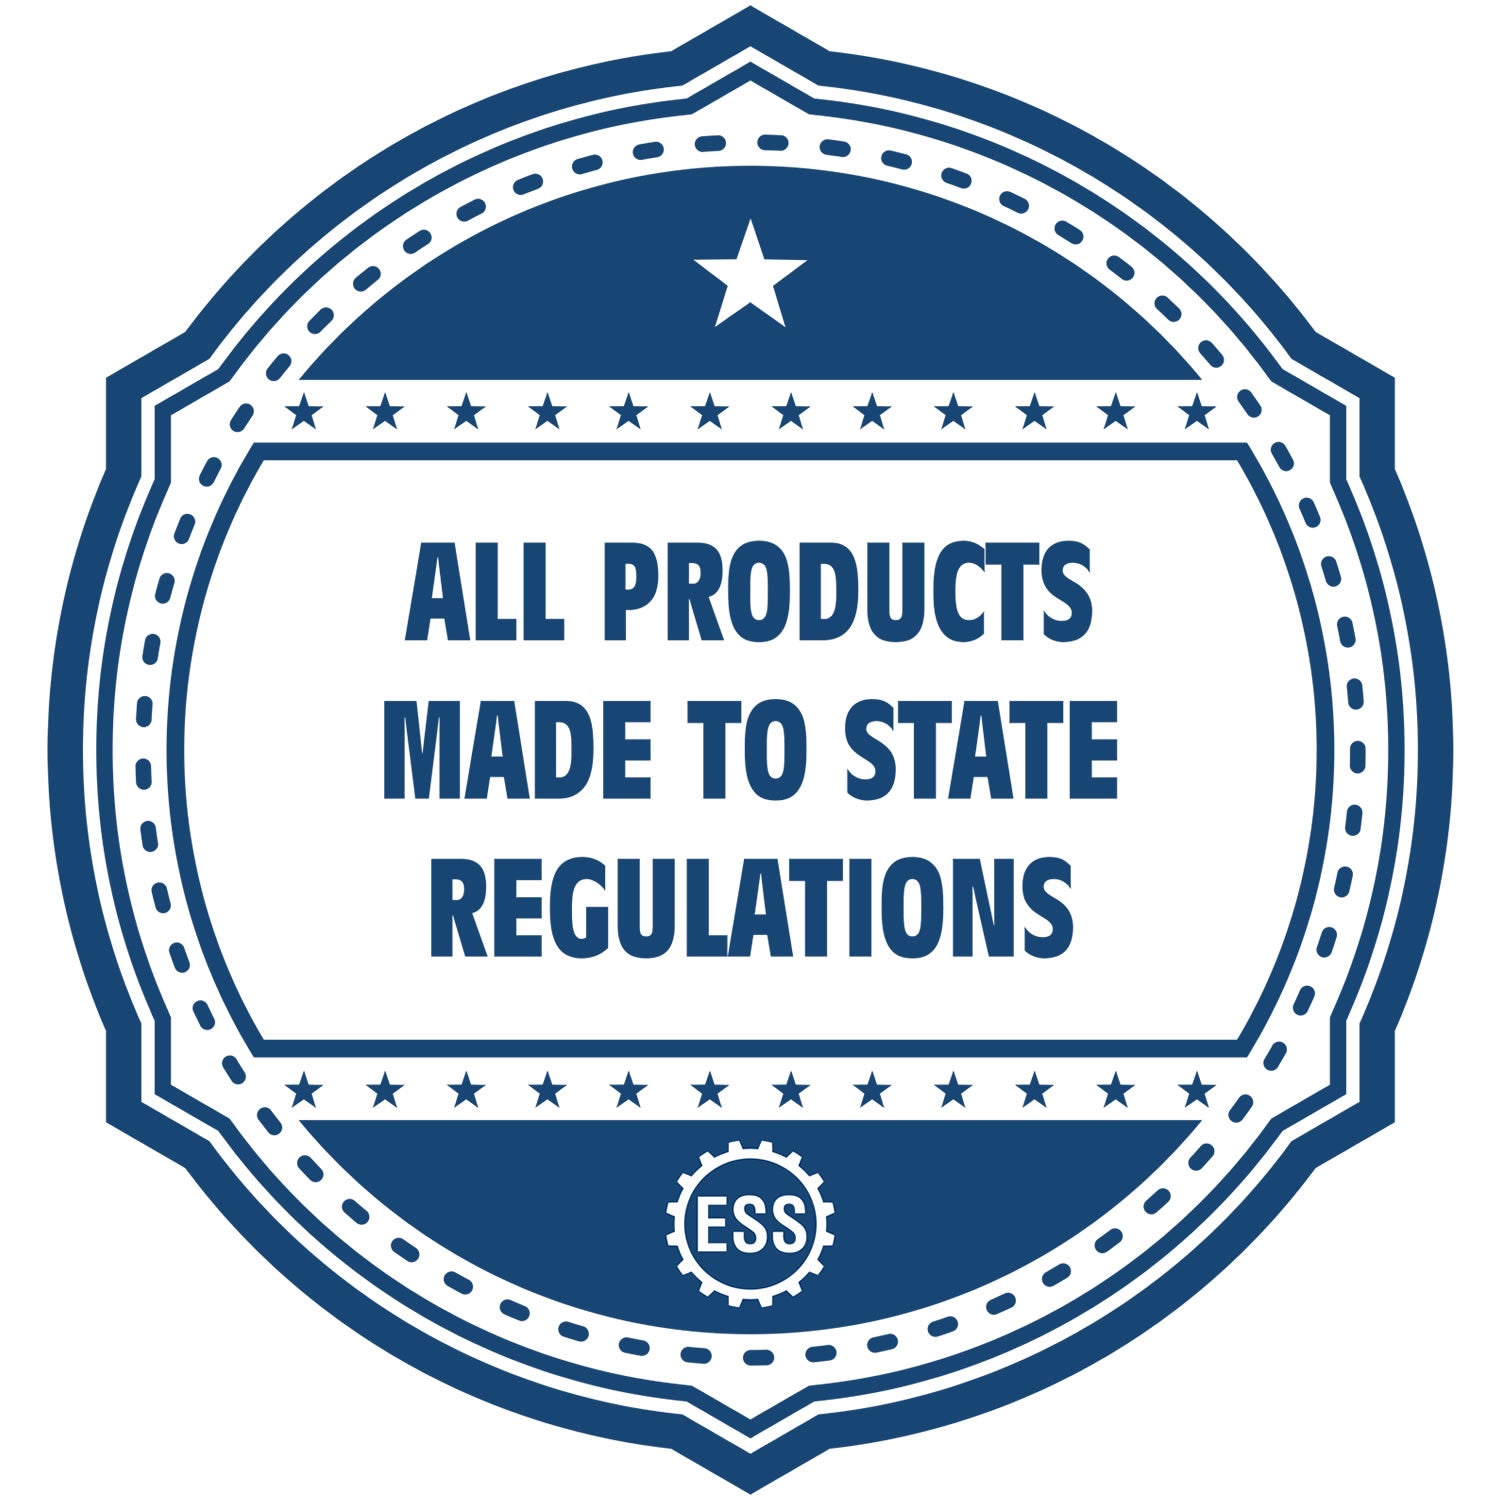 An icon or badge element for the Handheld Colorado Professional Engineer Embosser showing that this product is made in compliance with state regulations.